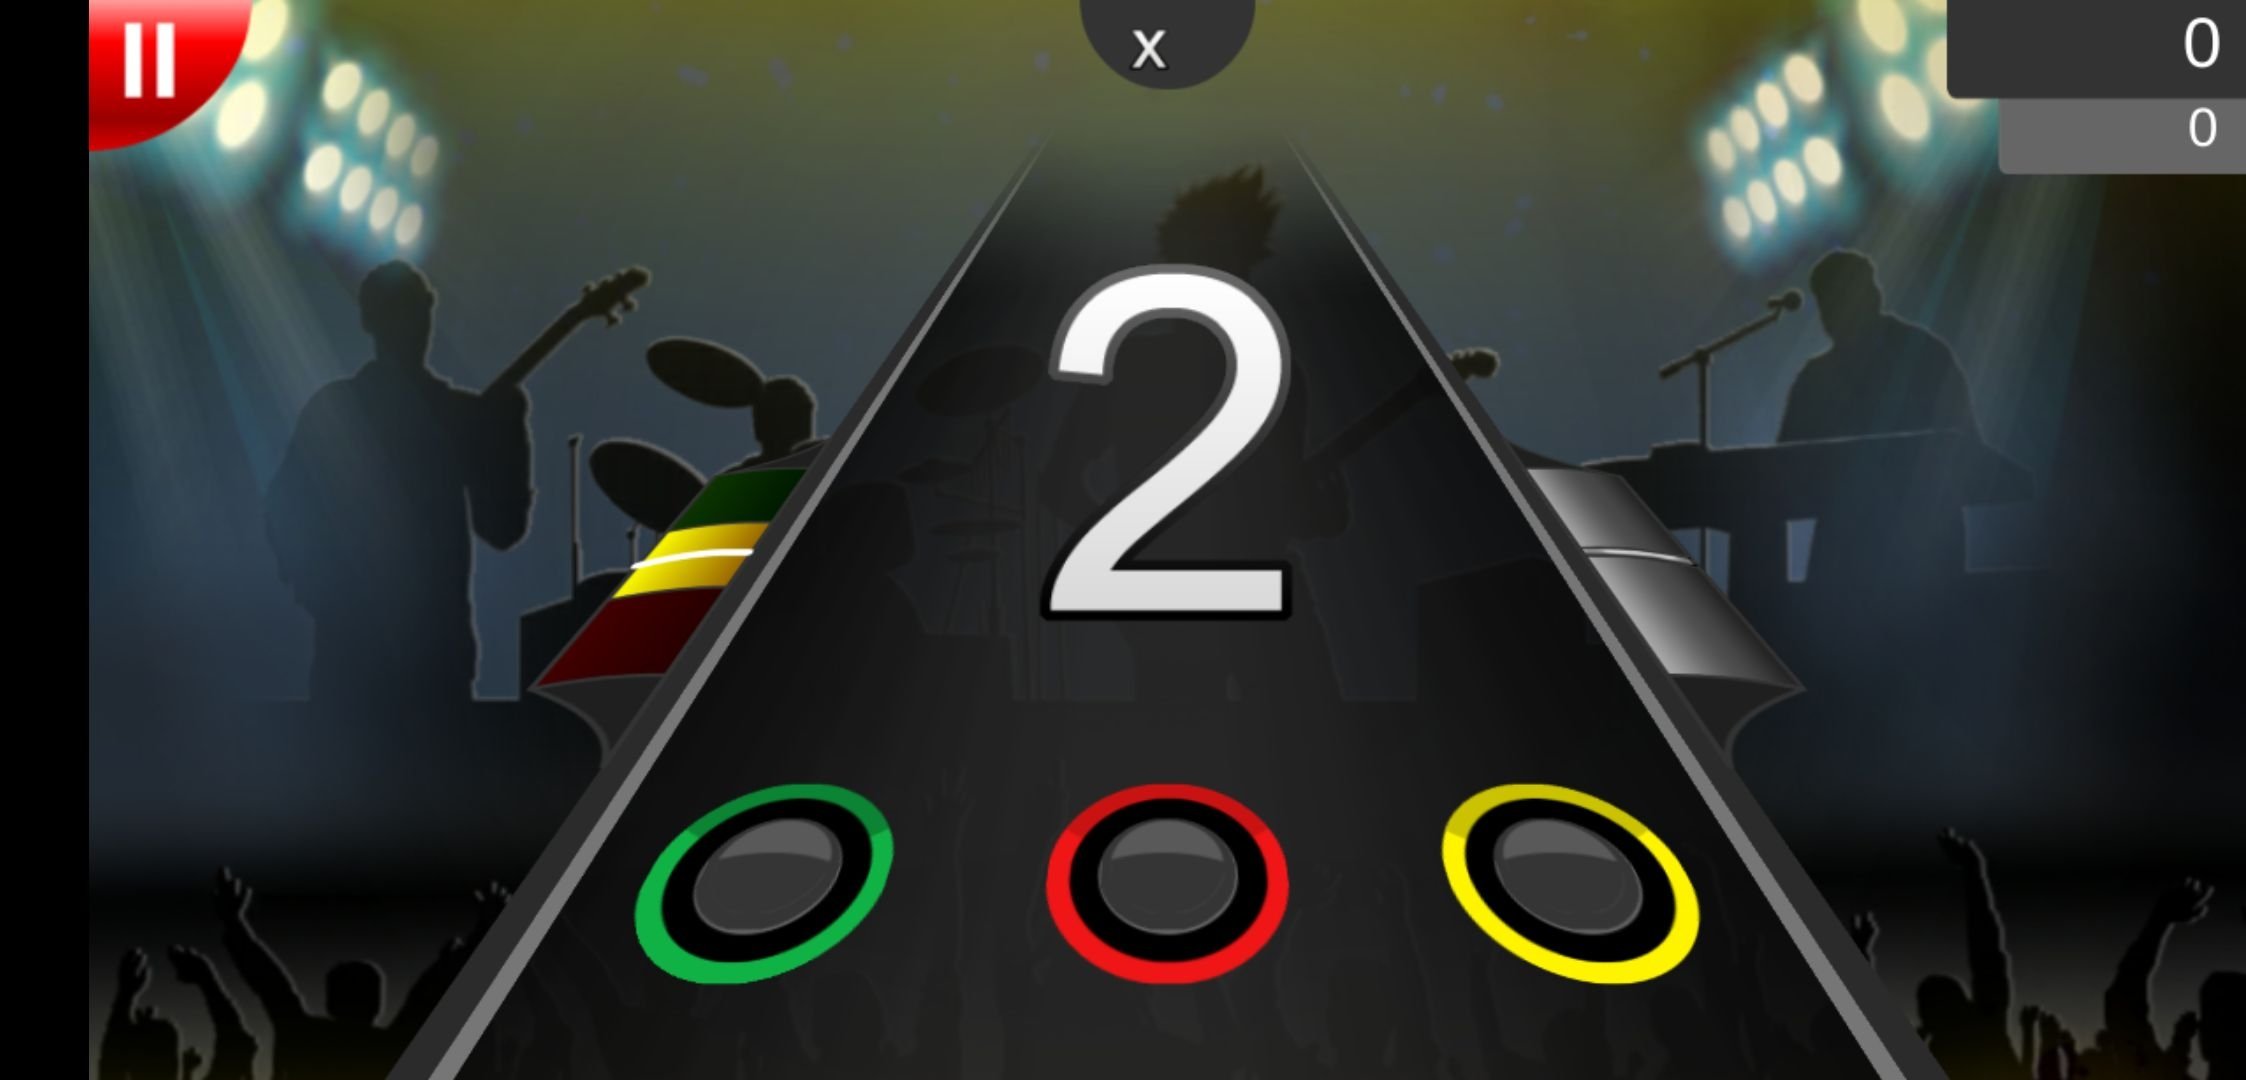 Guitar Flash - Download & Play for Free Here